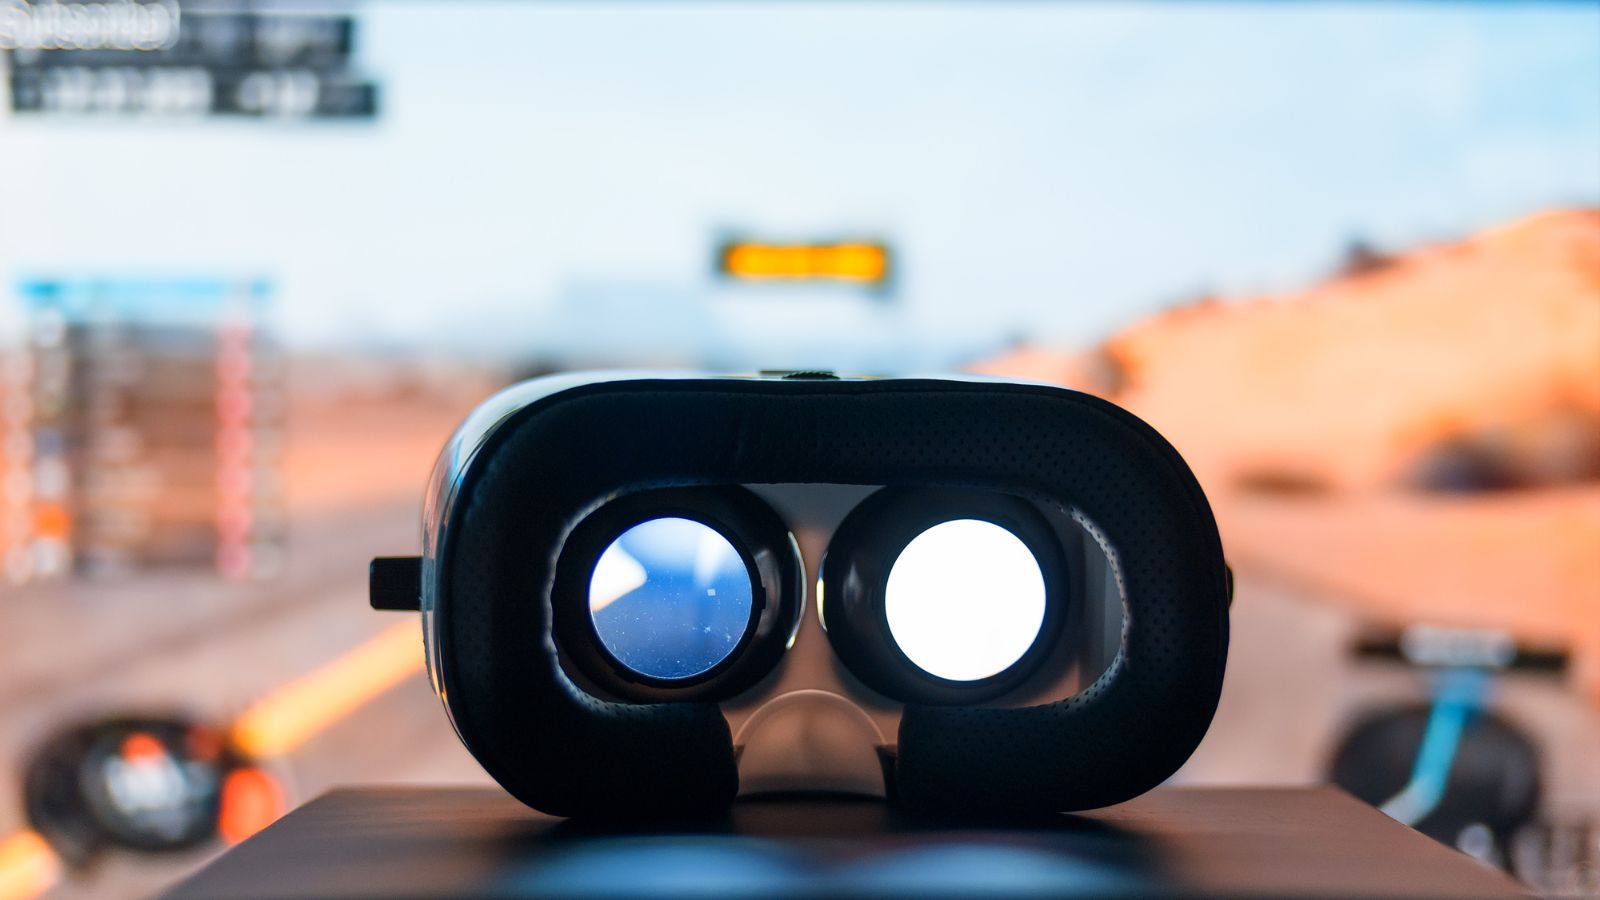 AR and VR: How to Find the
Perfect Marketing Agency Partner